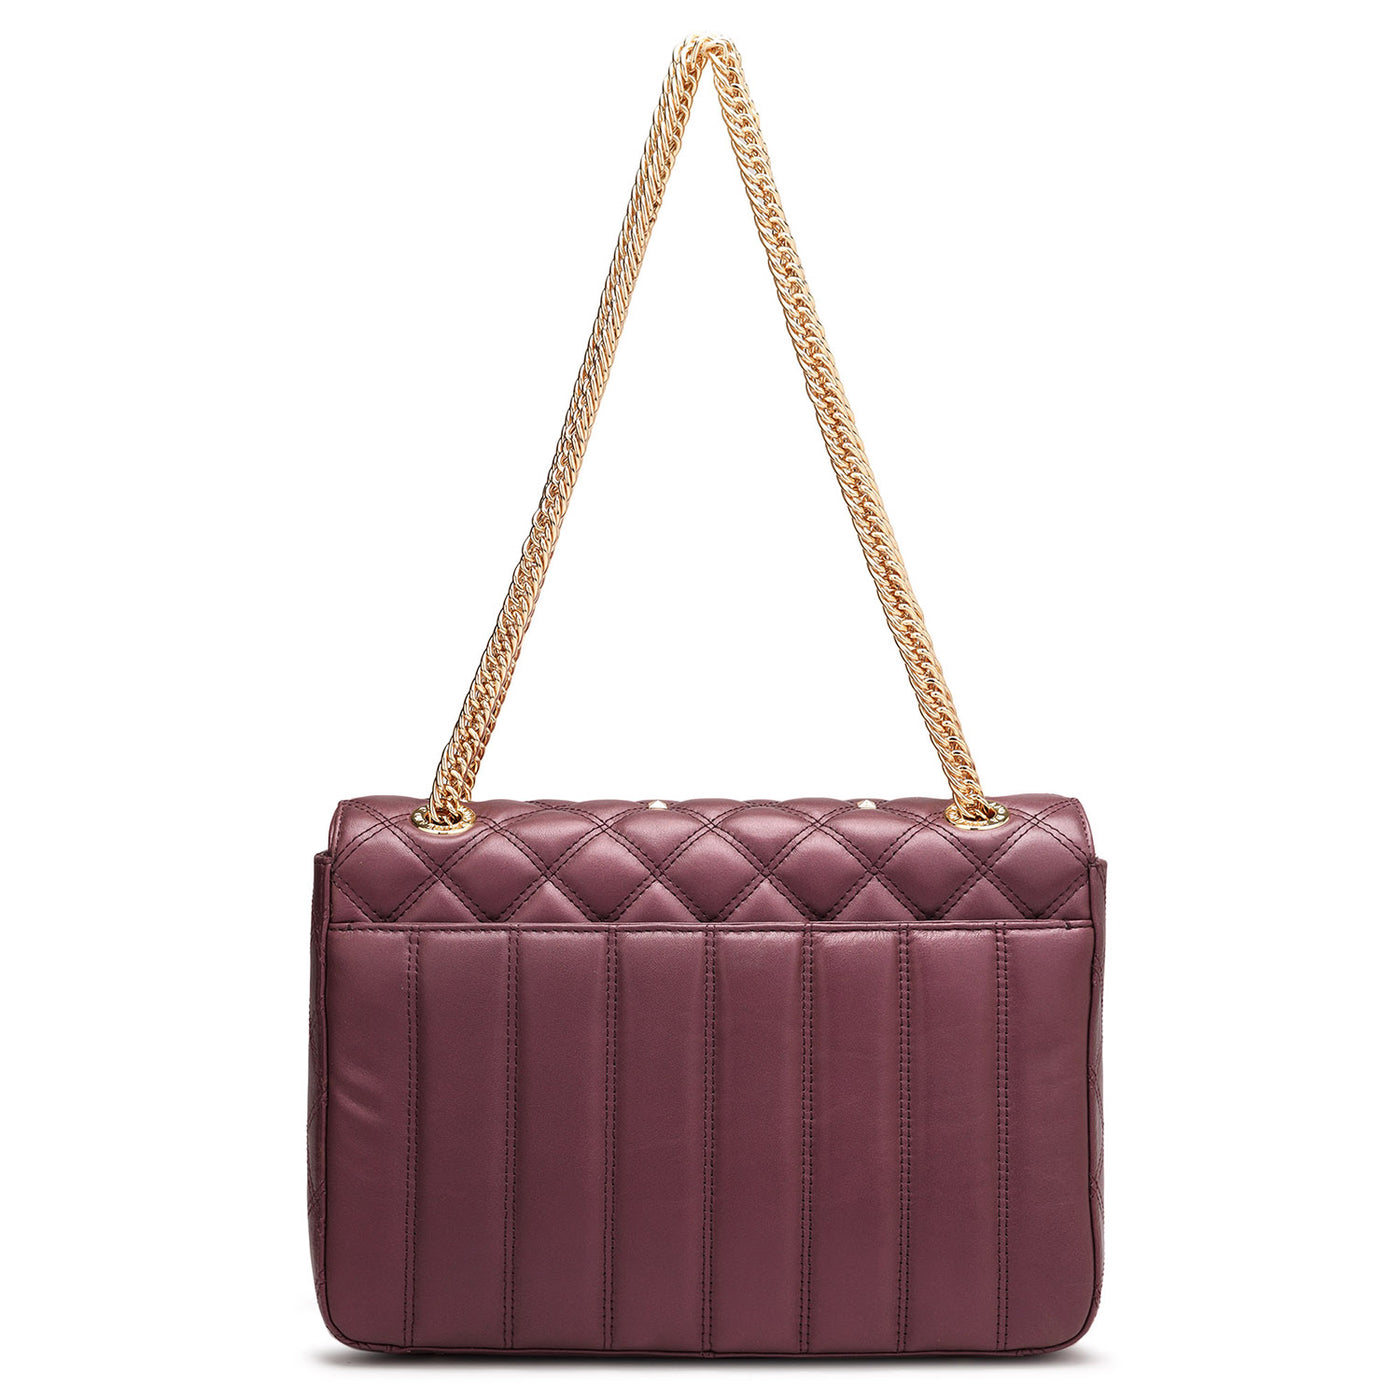 Fairfax & Favor Plum Collection | Wadswick Country Store Ltd